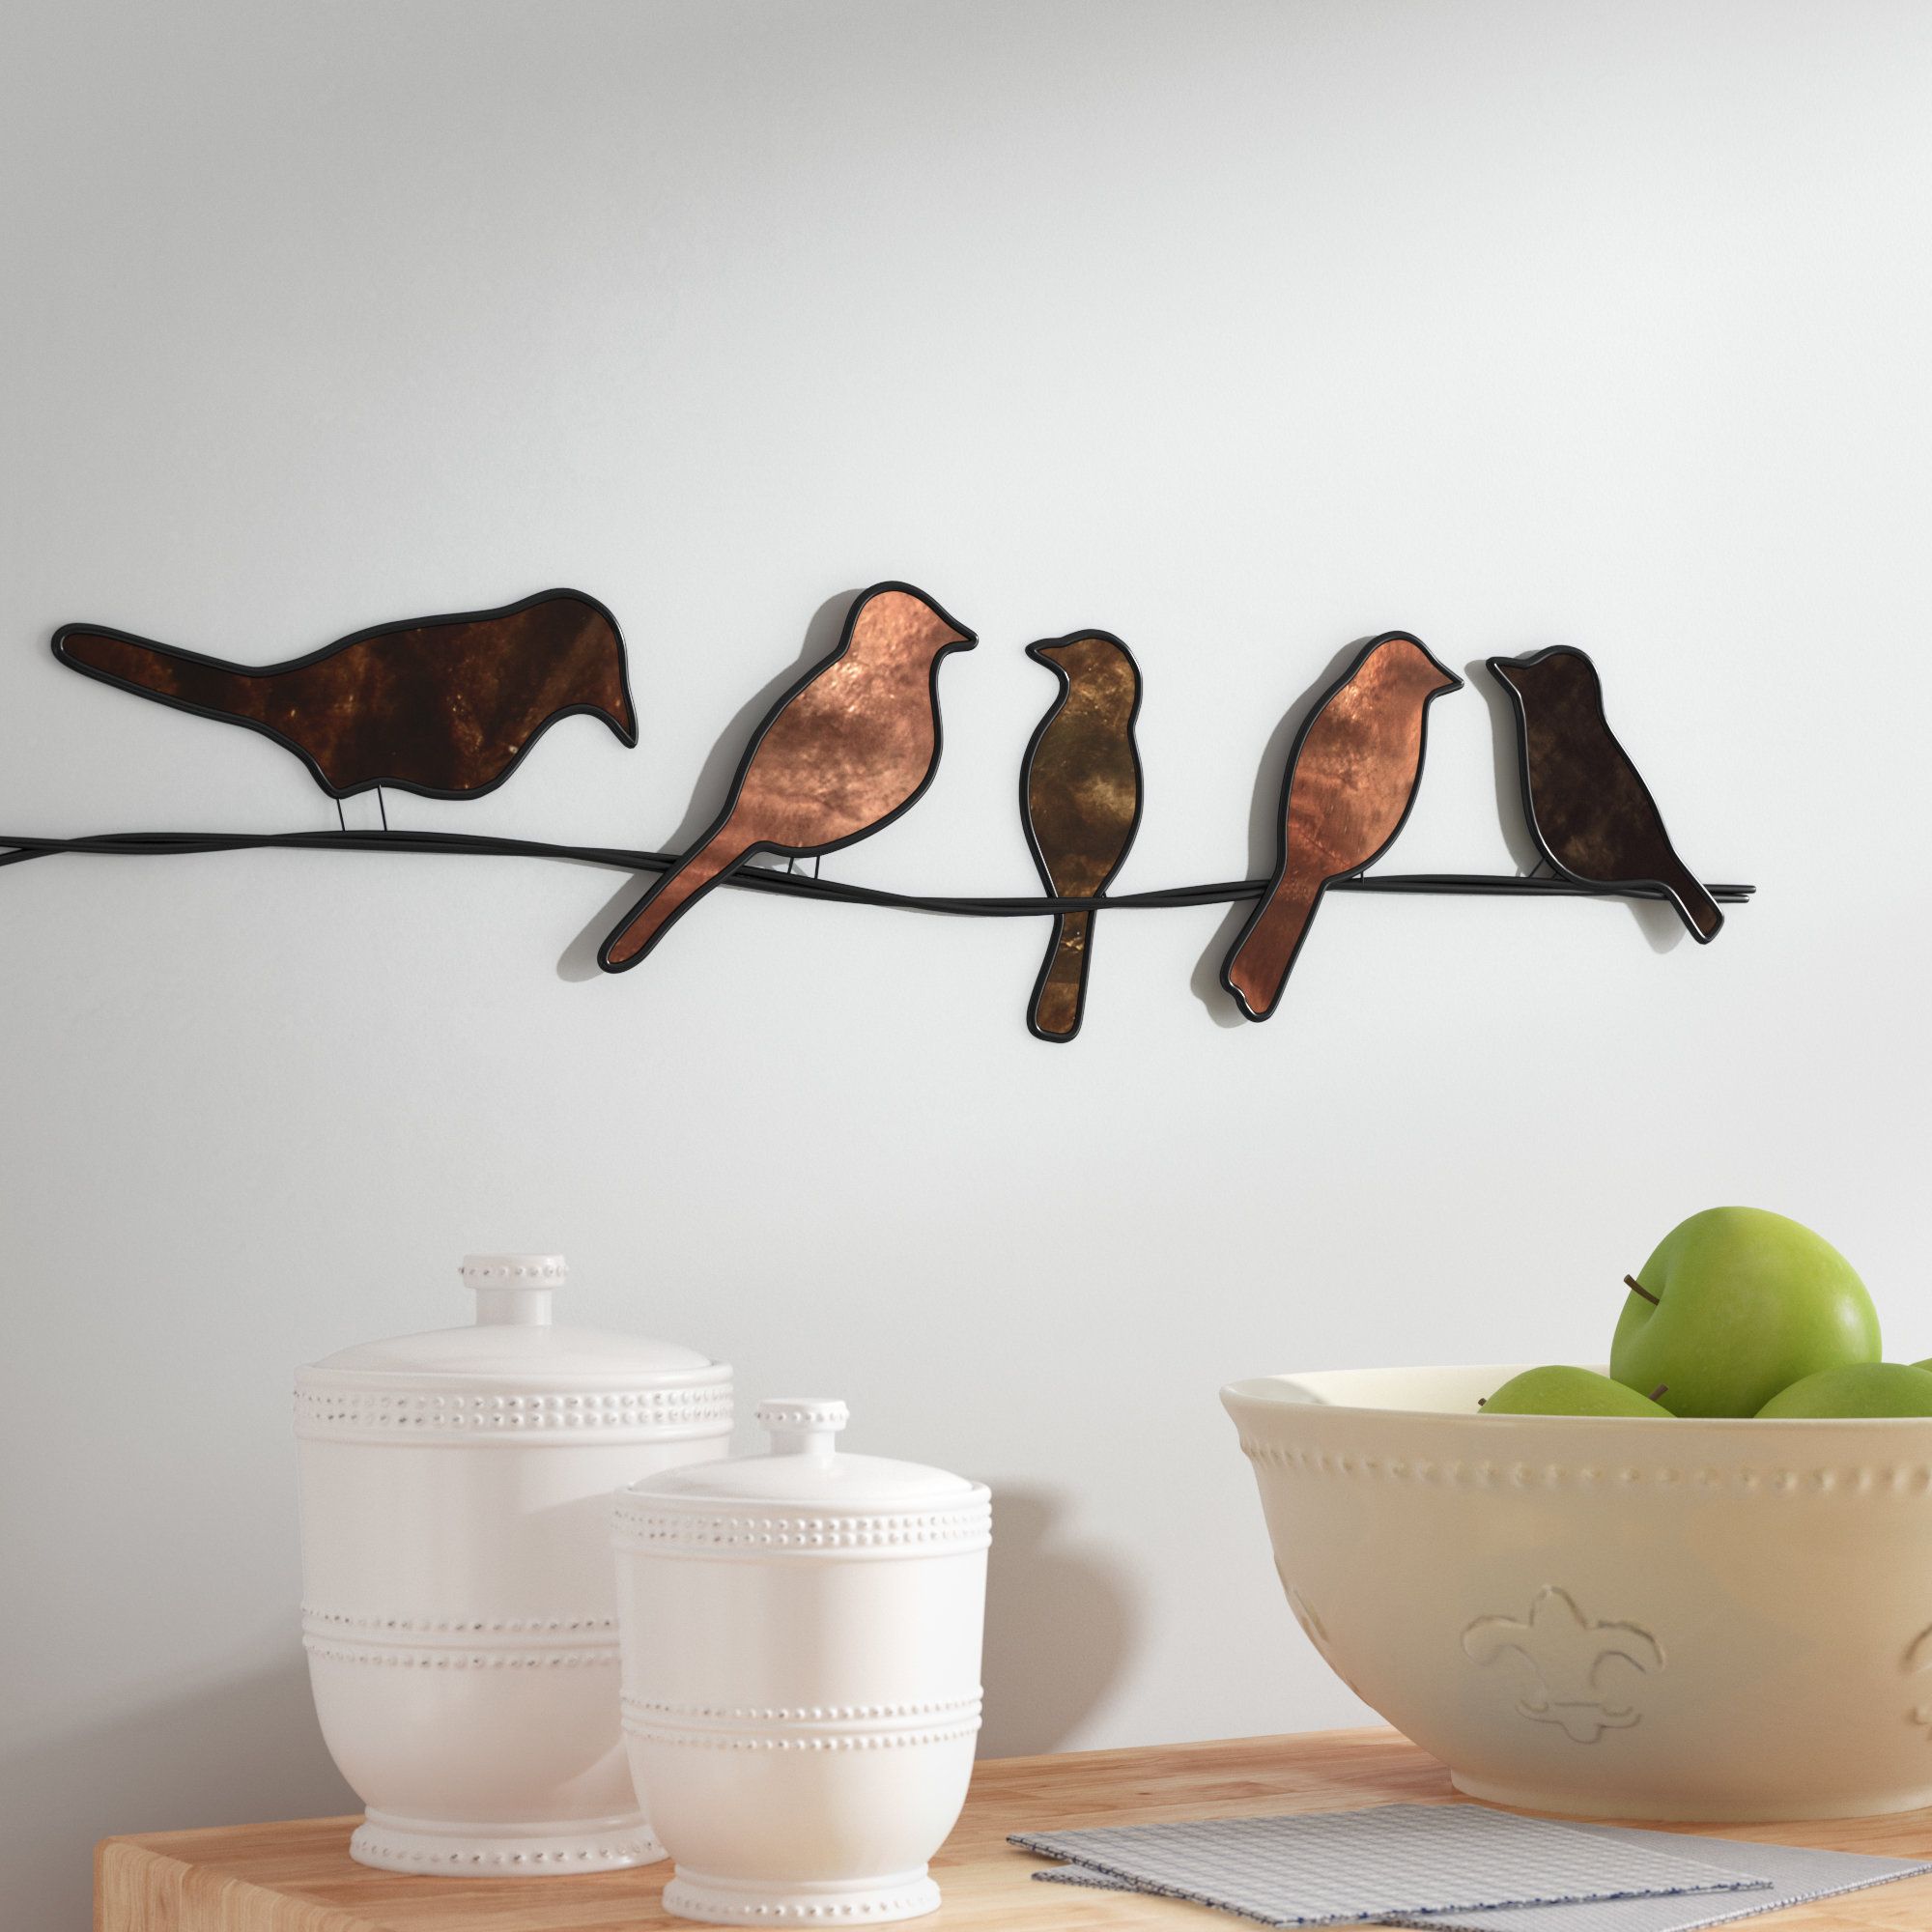 Wayfair Throughout Birds On A Wire Wall Decor (View 1 of 20)